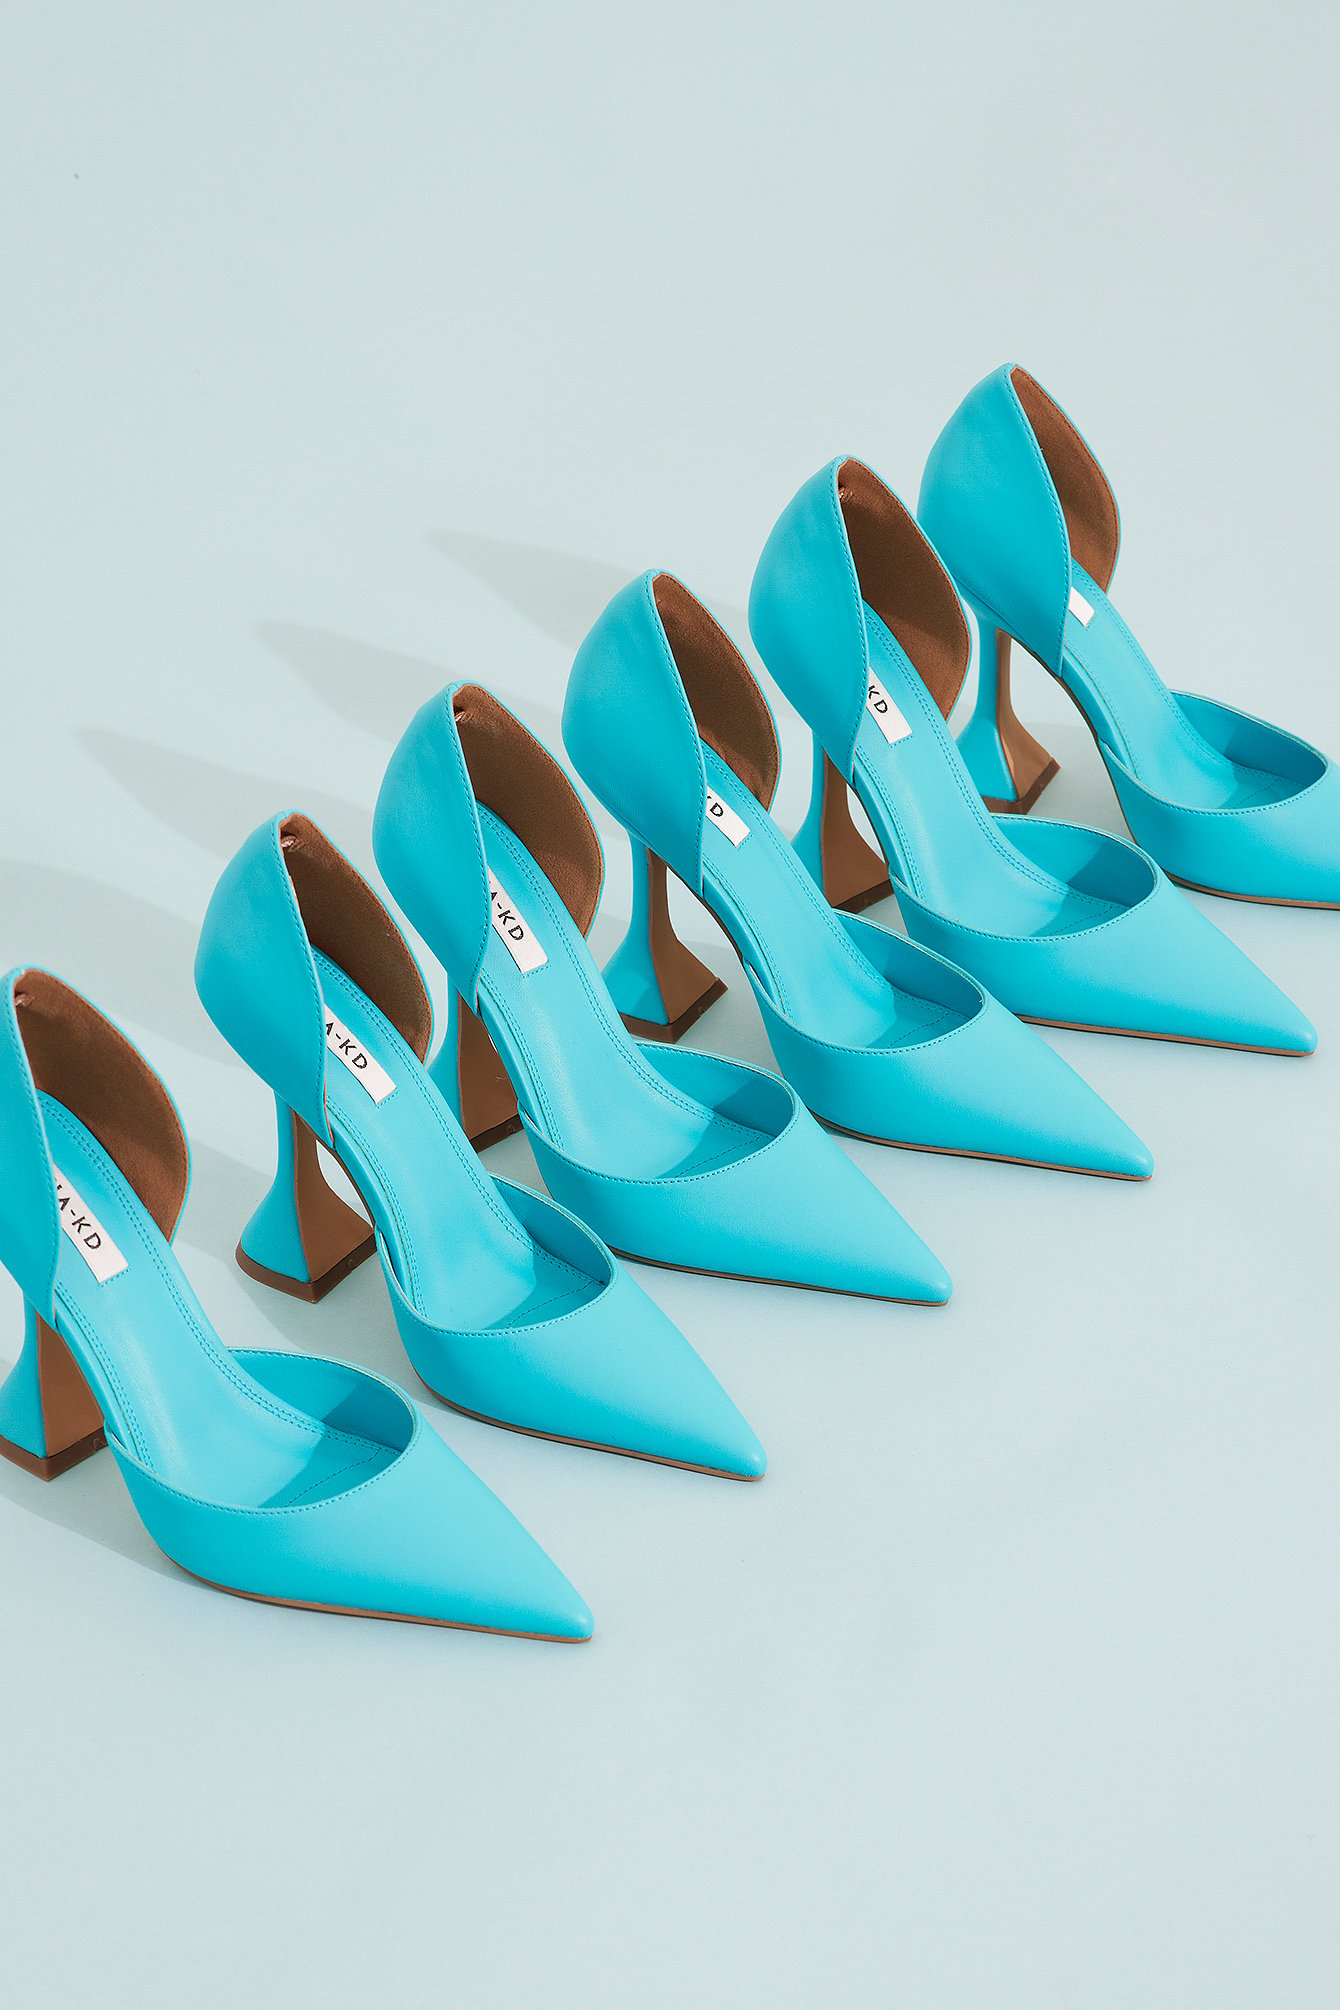 na-kd shoes hourglass pointy pumps - turquoise